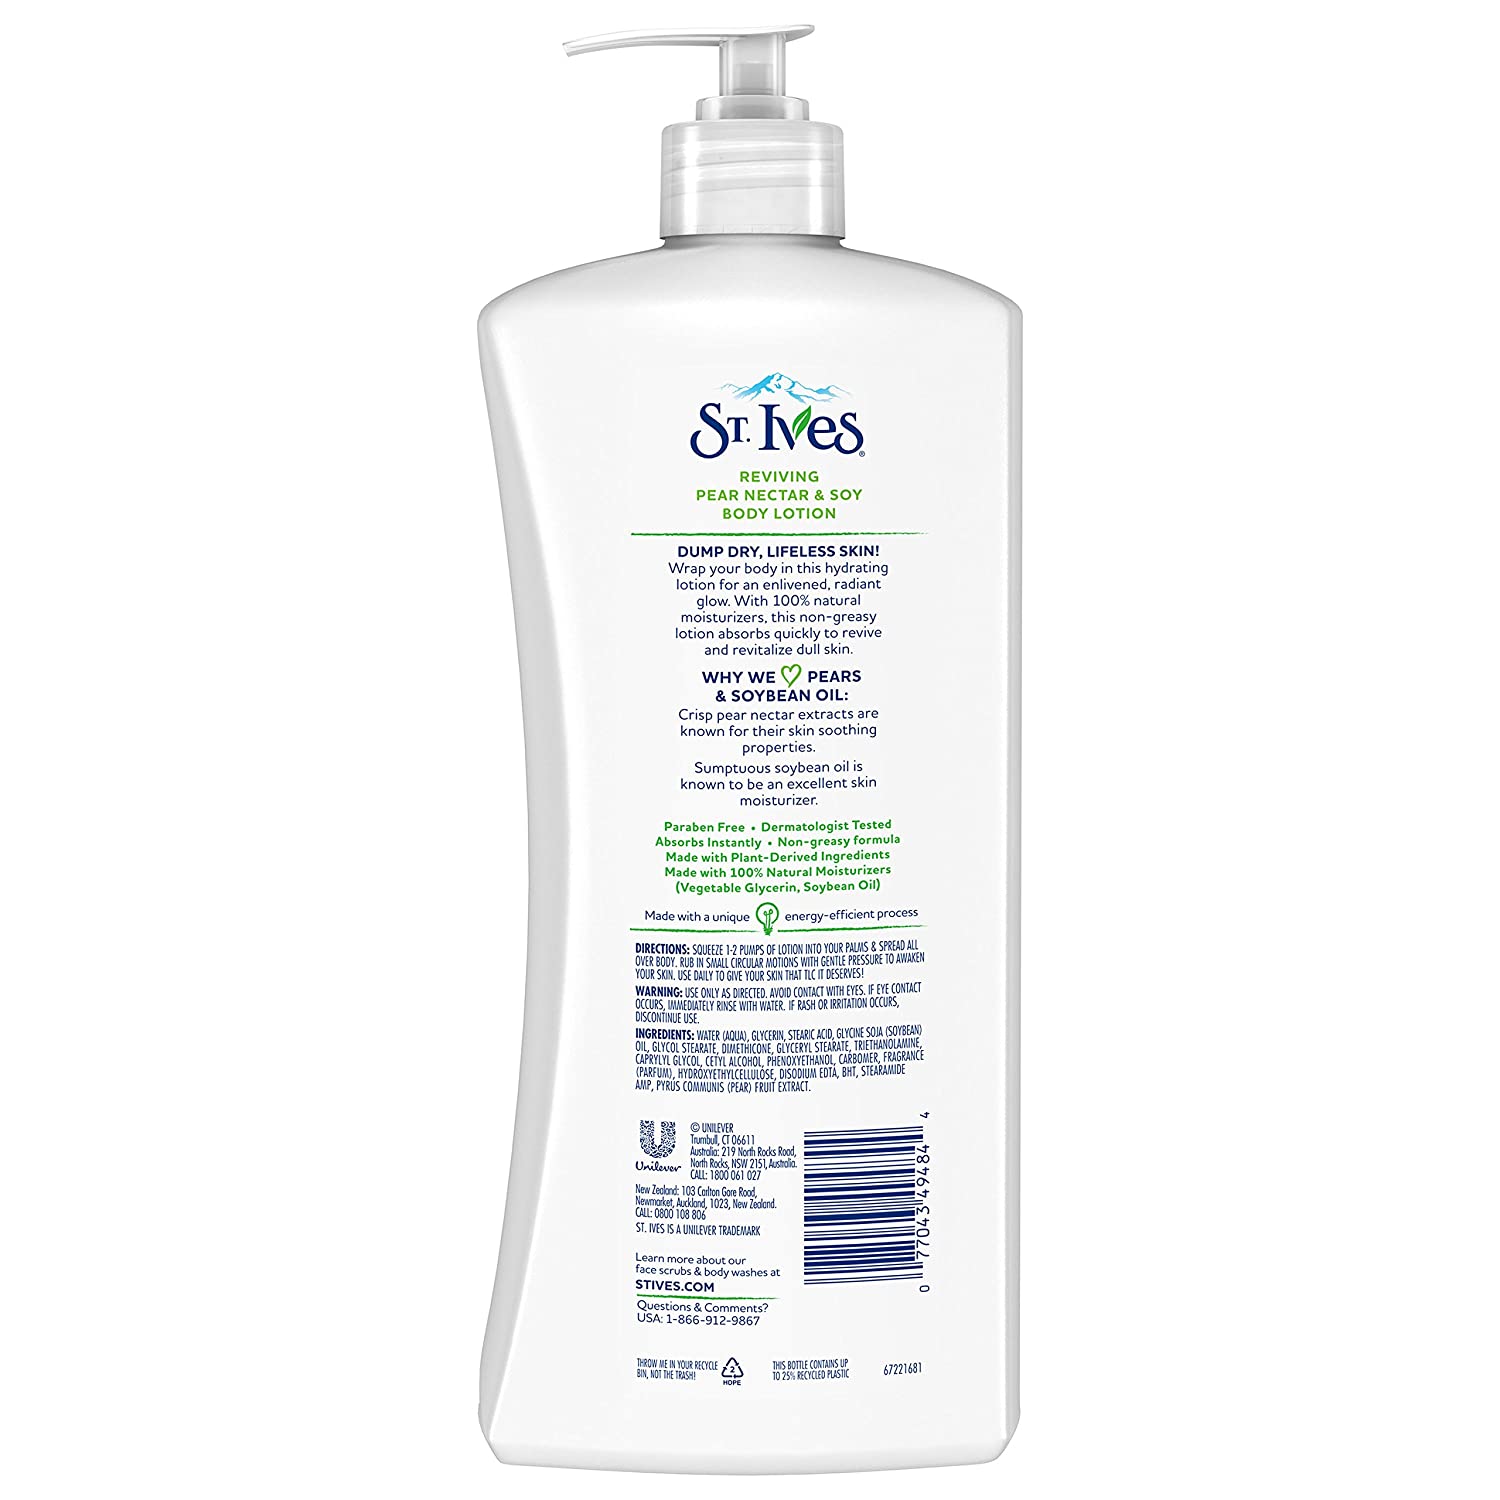 St. Ives Reviving Pear Nectar And Soy Body Lotion (621 ml) St. Ives